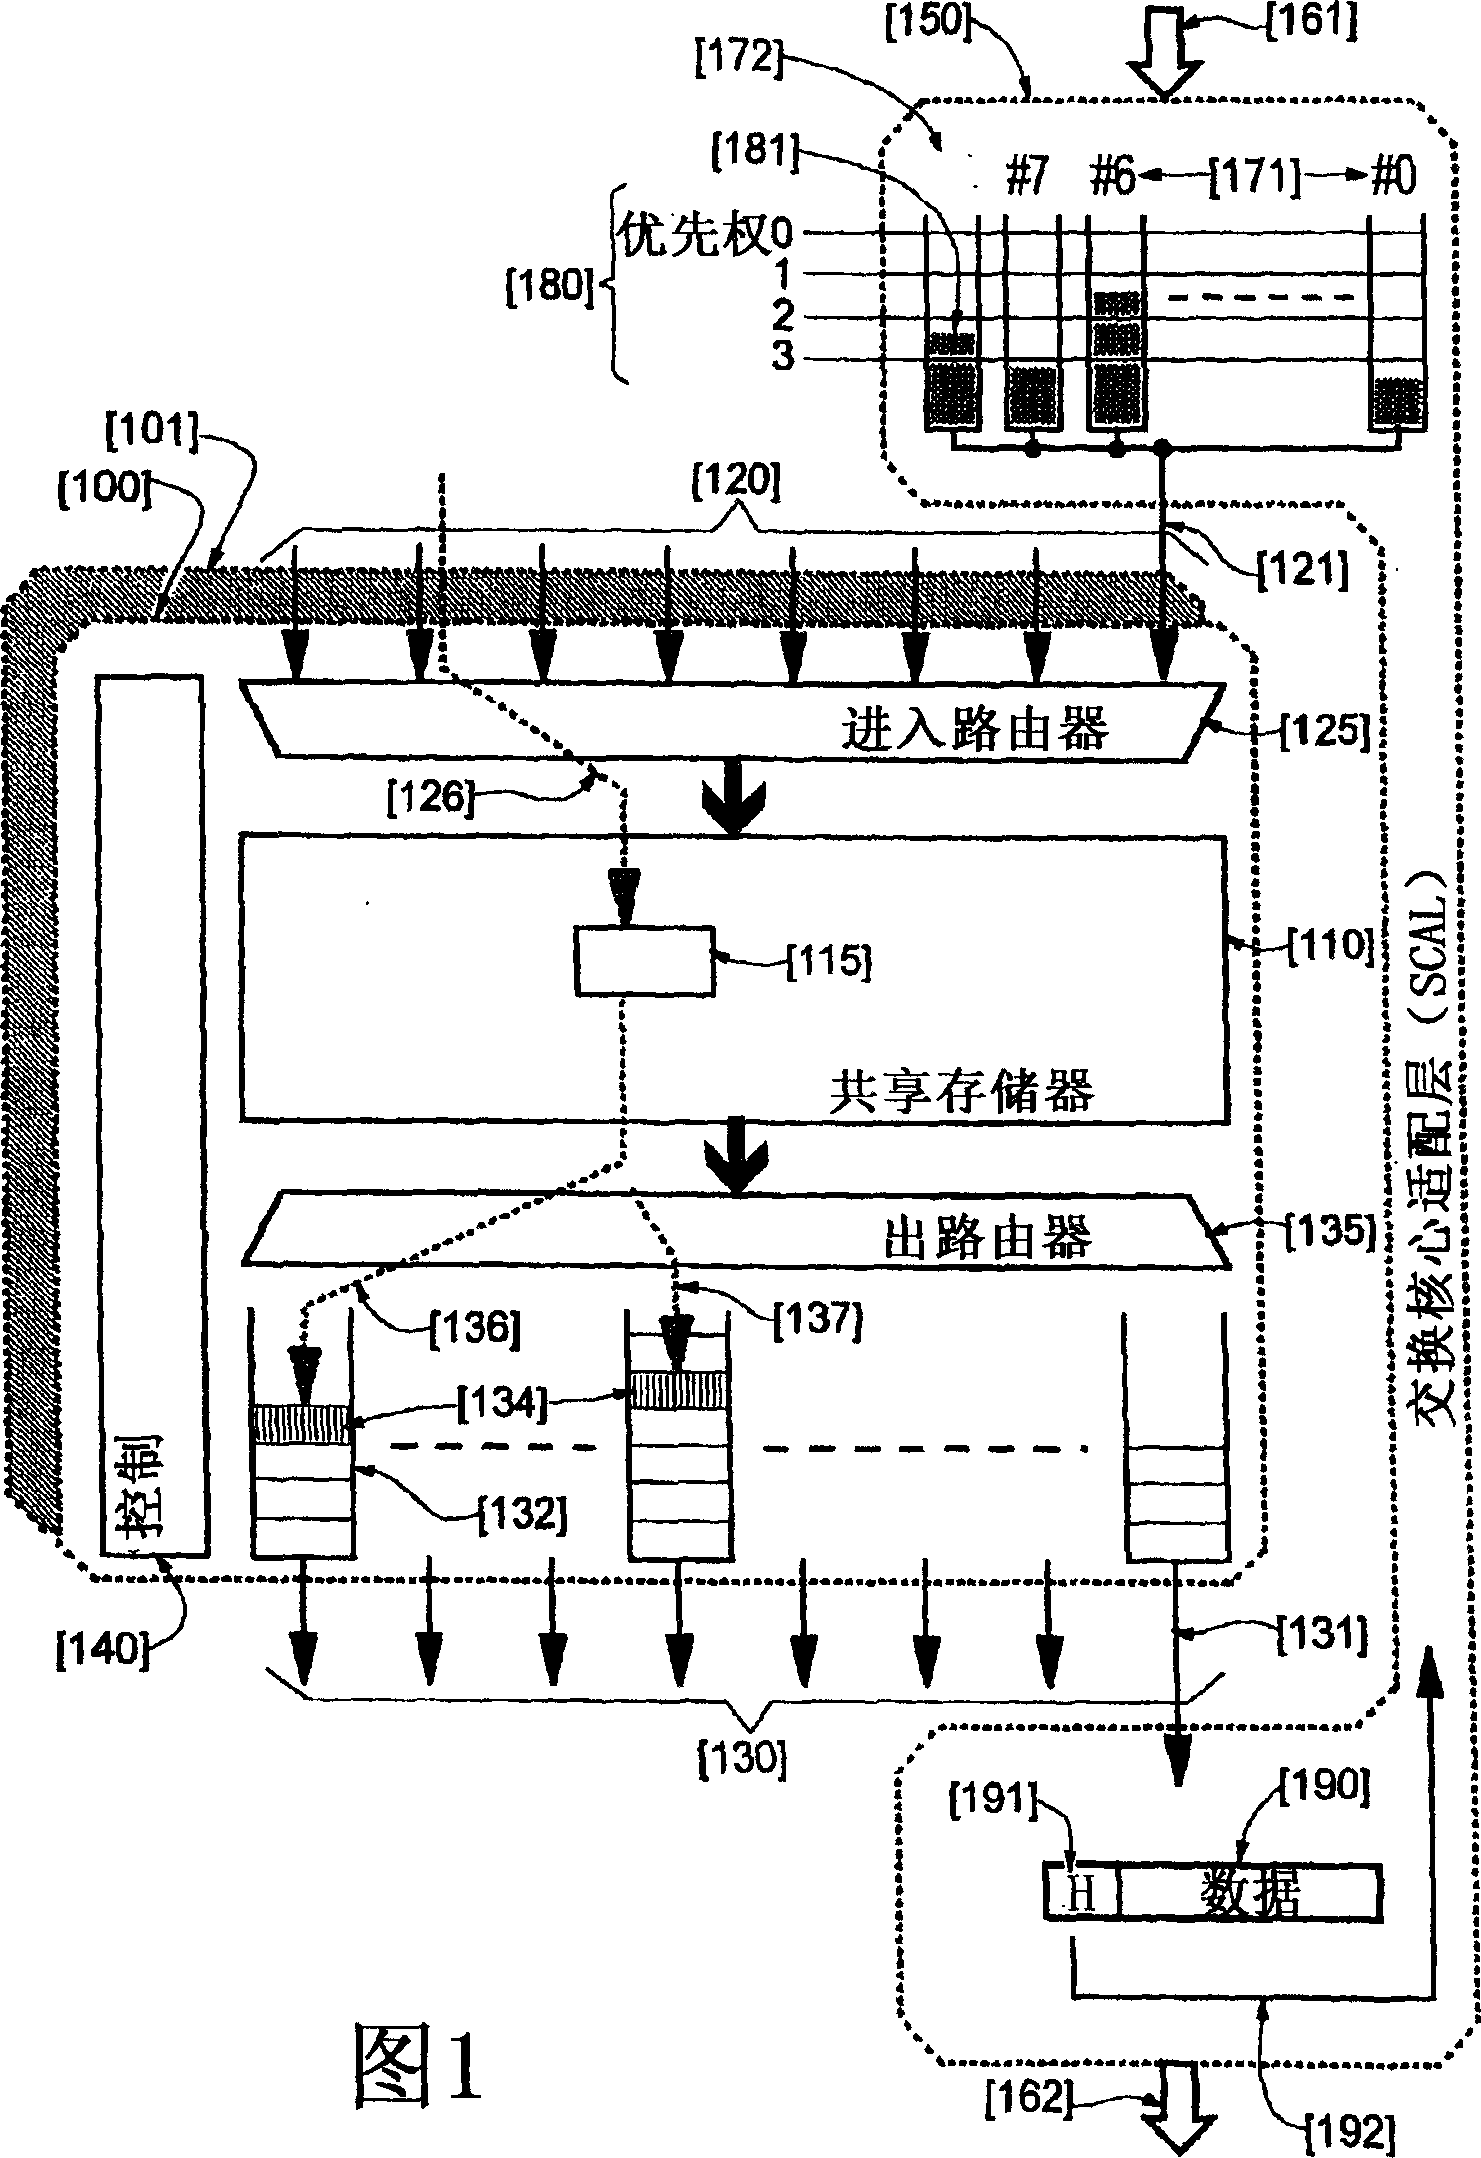 System and method for controlling the multicast traffic of a data packet switch